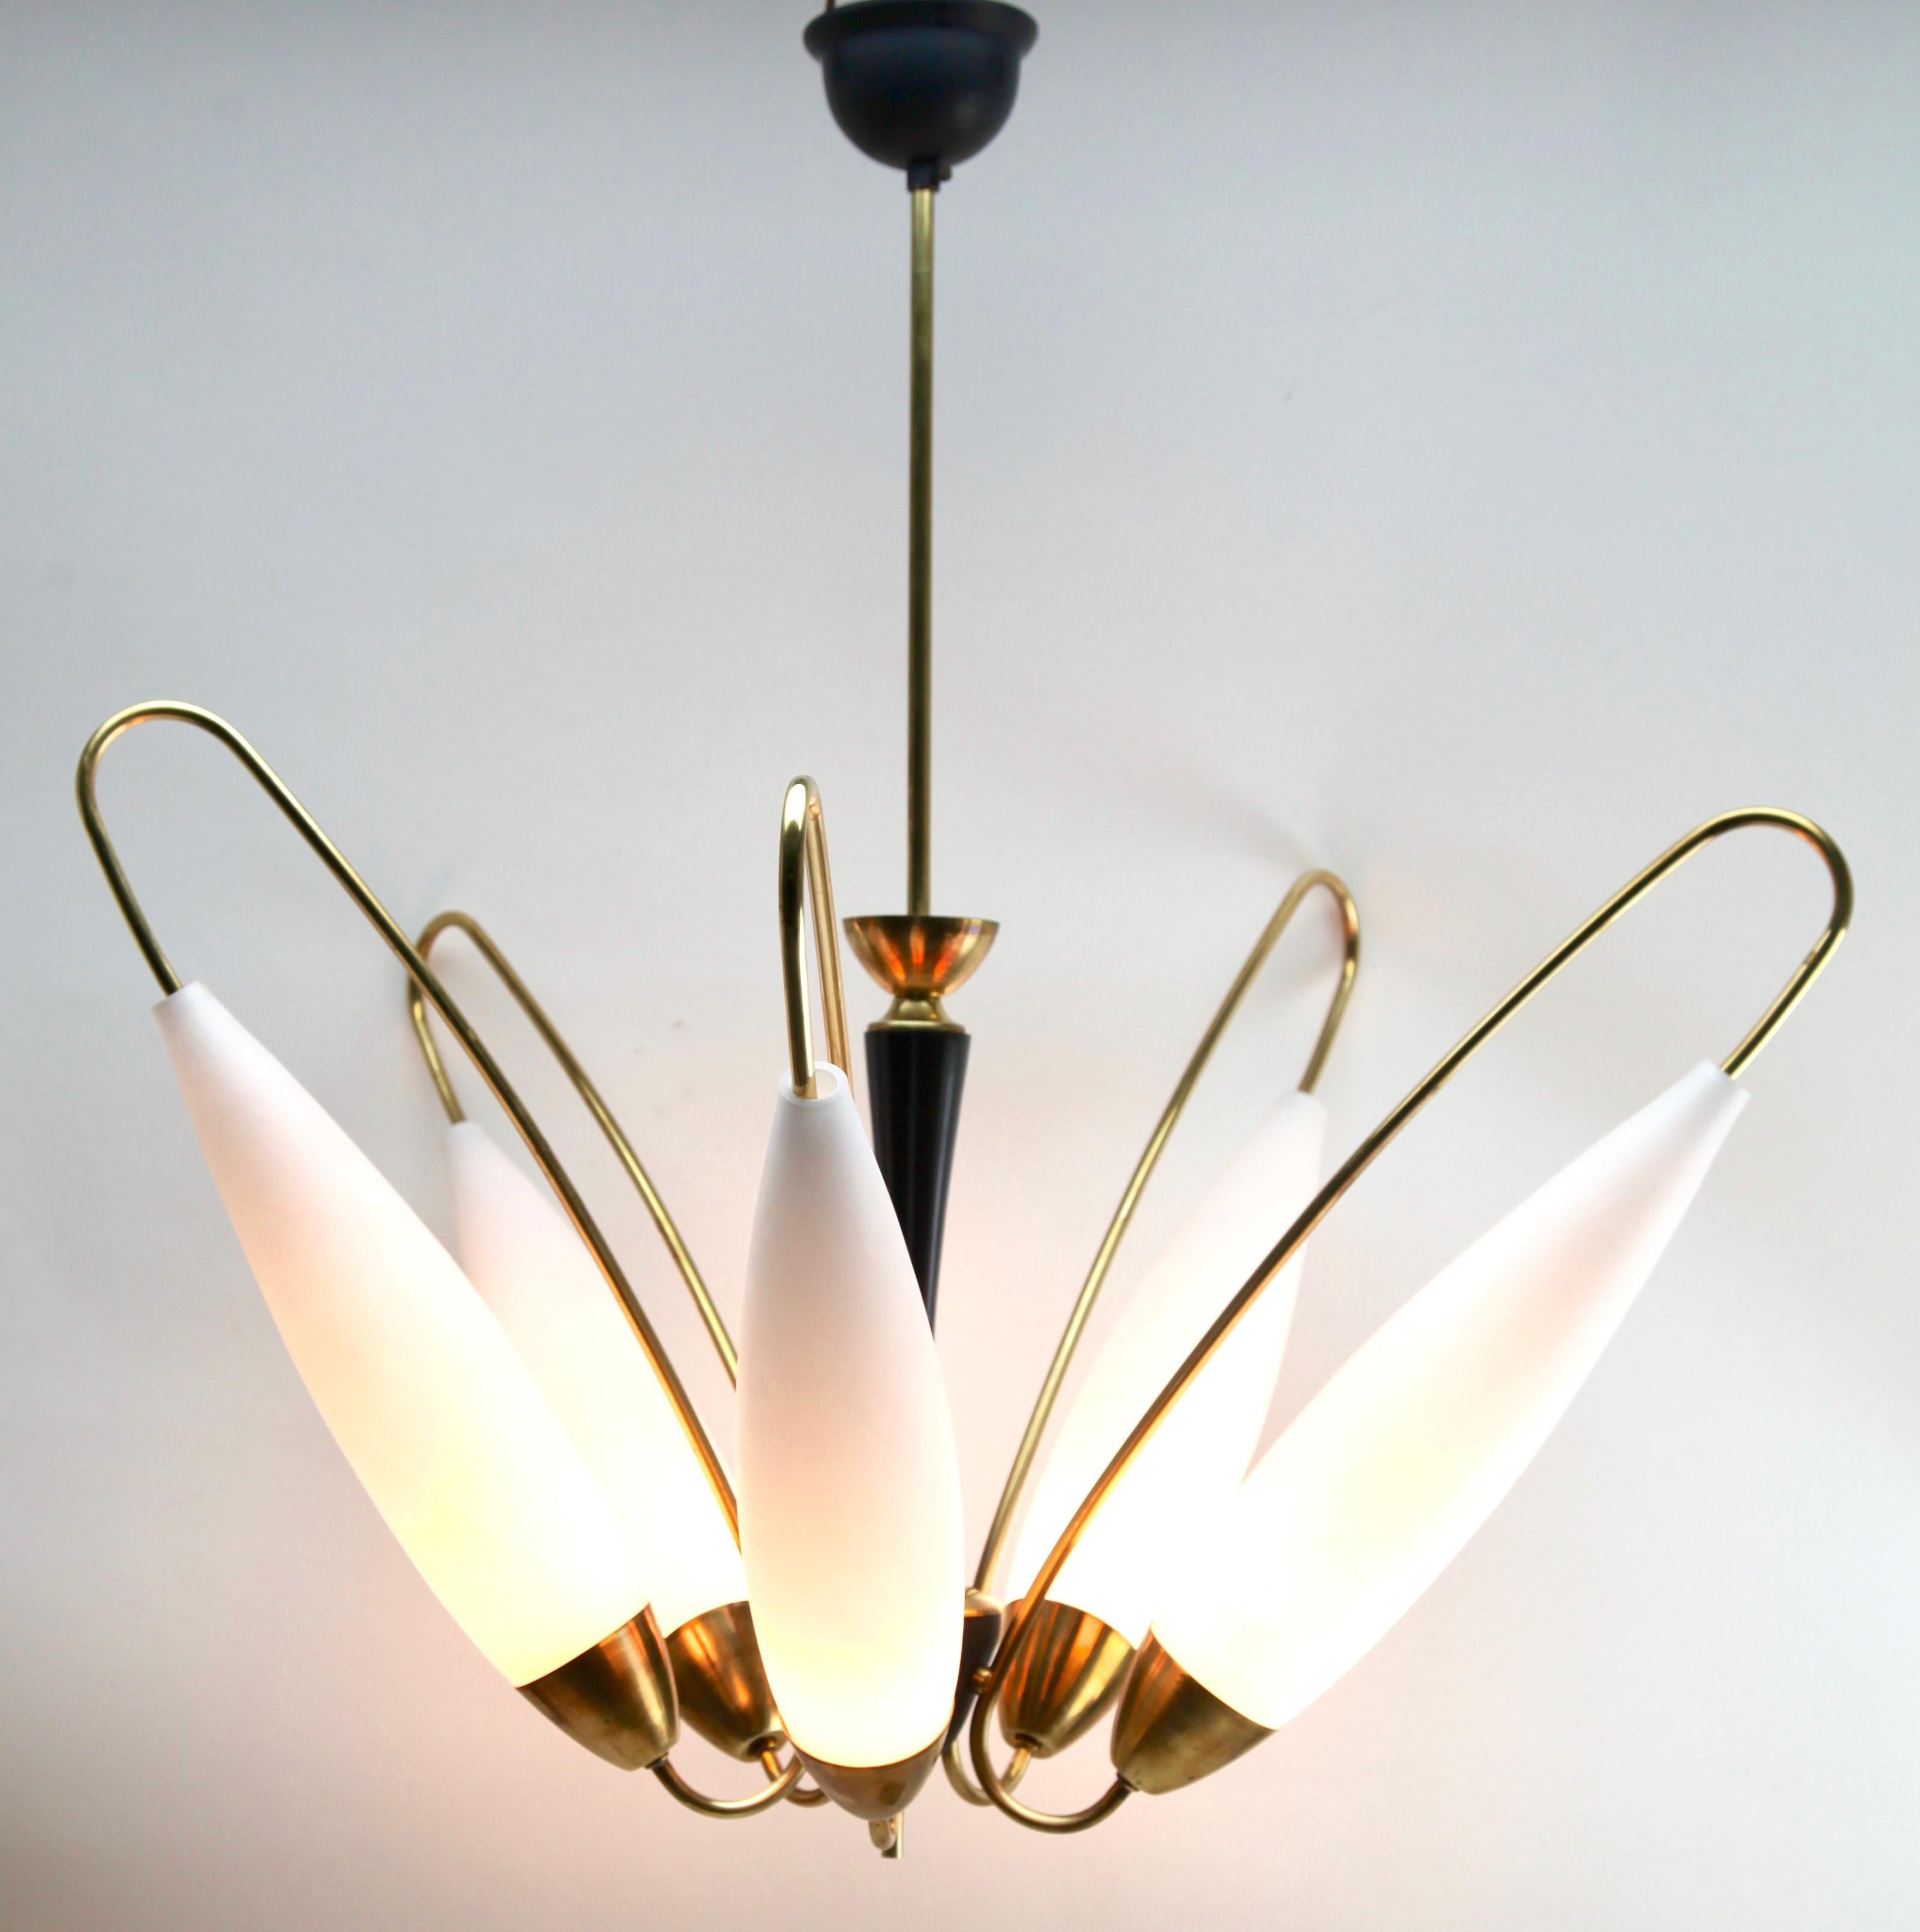 Five arms chandelier in the style of Stilnovo.
Photography fails to capture the simple elegant illumination provided by this lamp.

Recently cleaned and polished so that it in excellent condition and in full working order having also
been re-wired